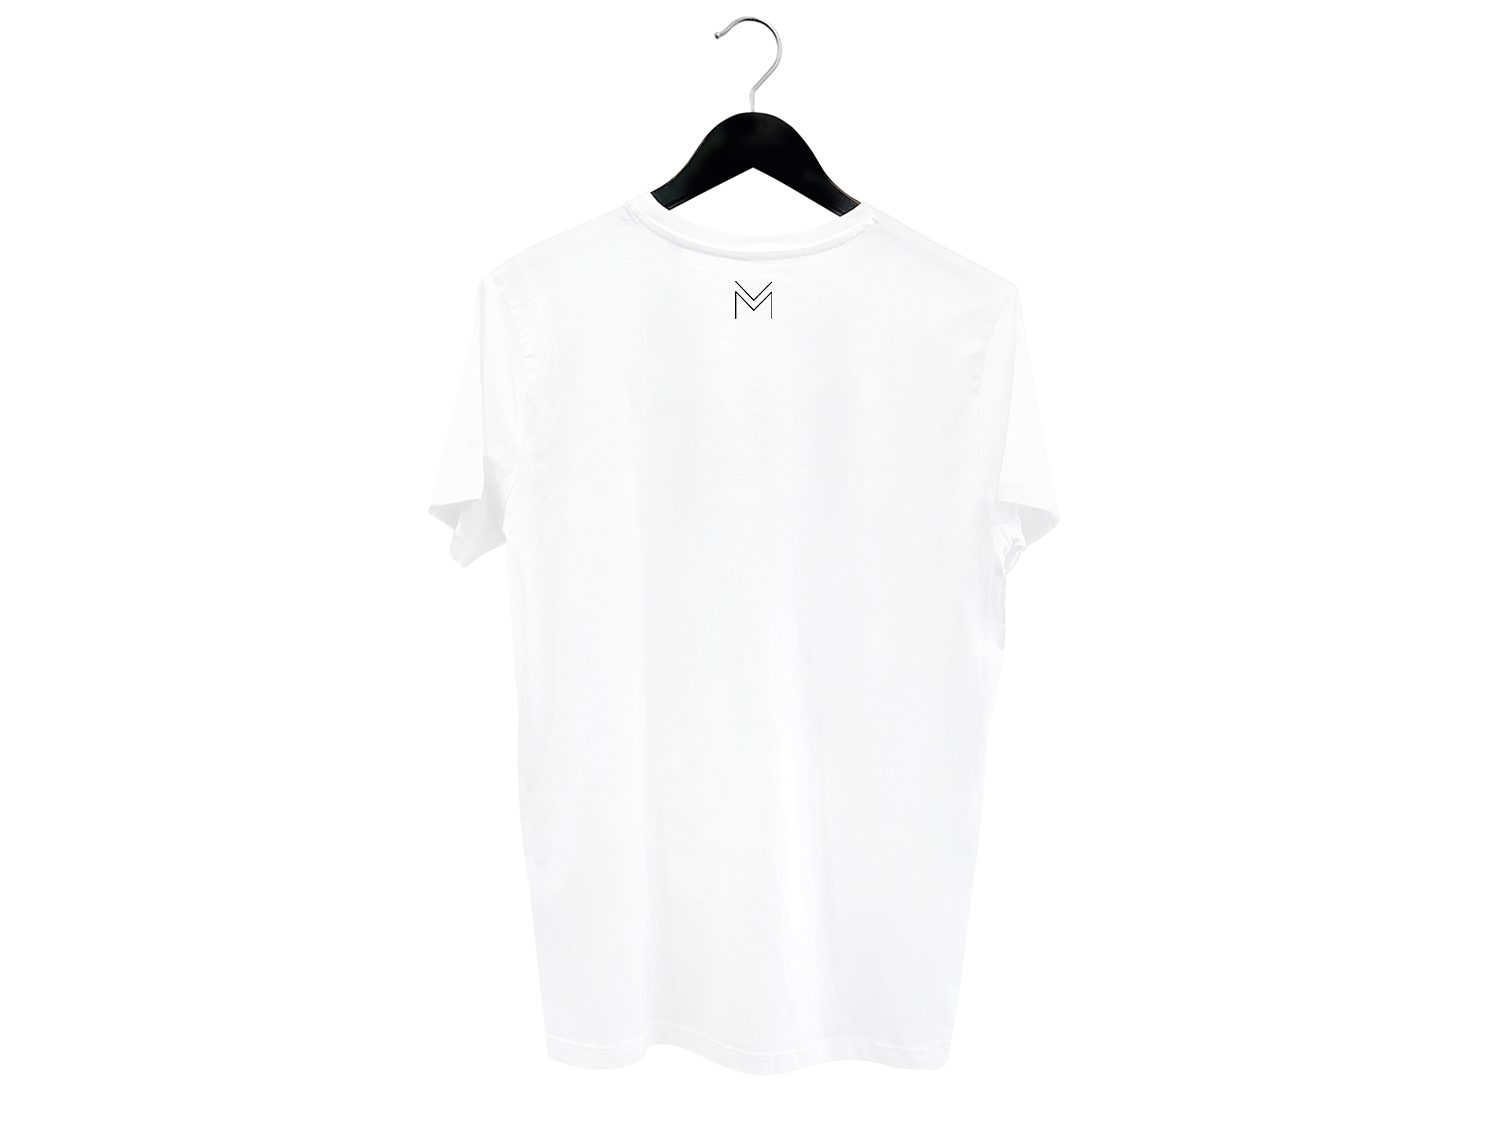 Marina real is T-Shirt imagine - Everything Vernicos Collection can - White you